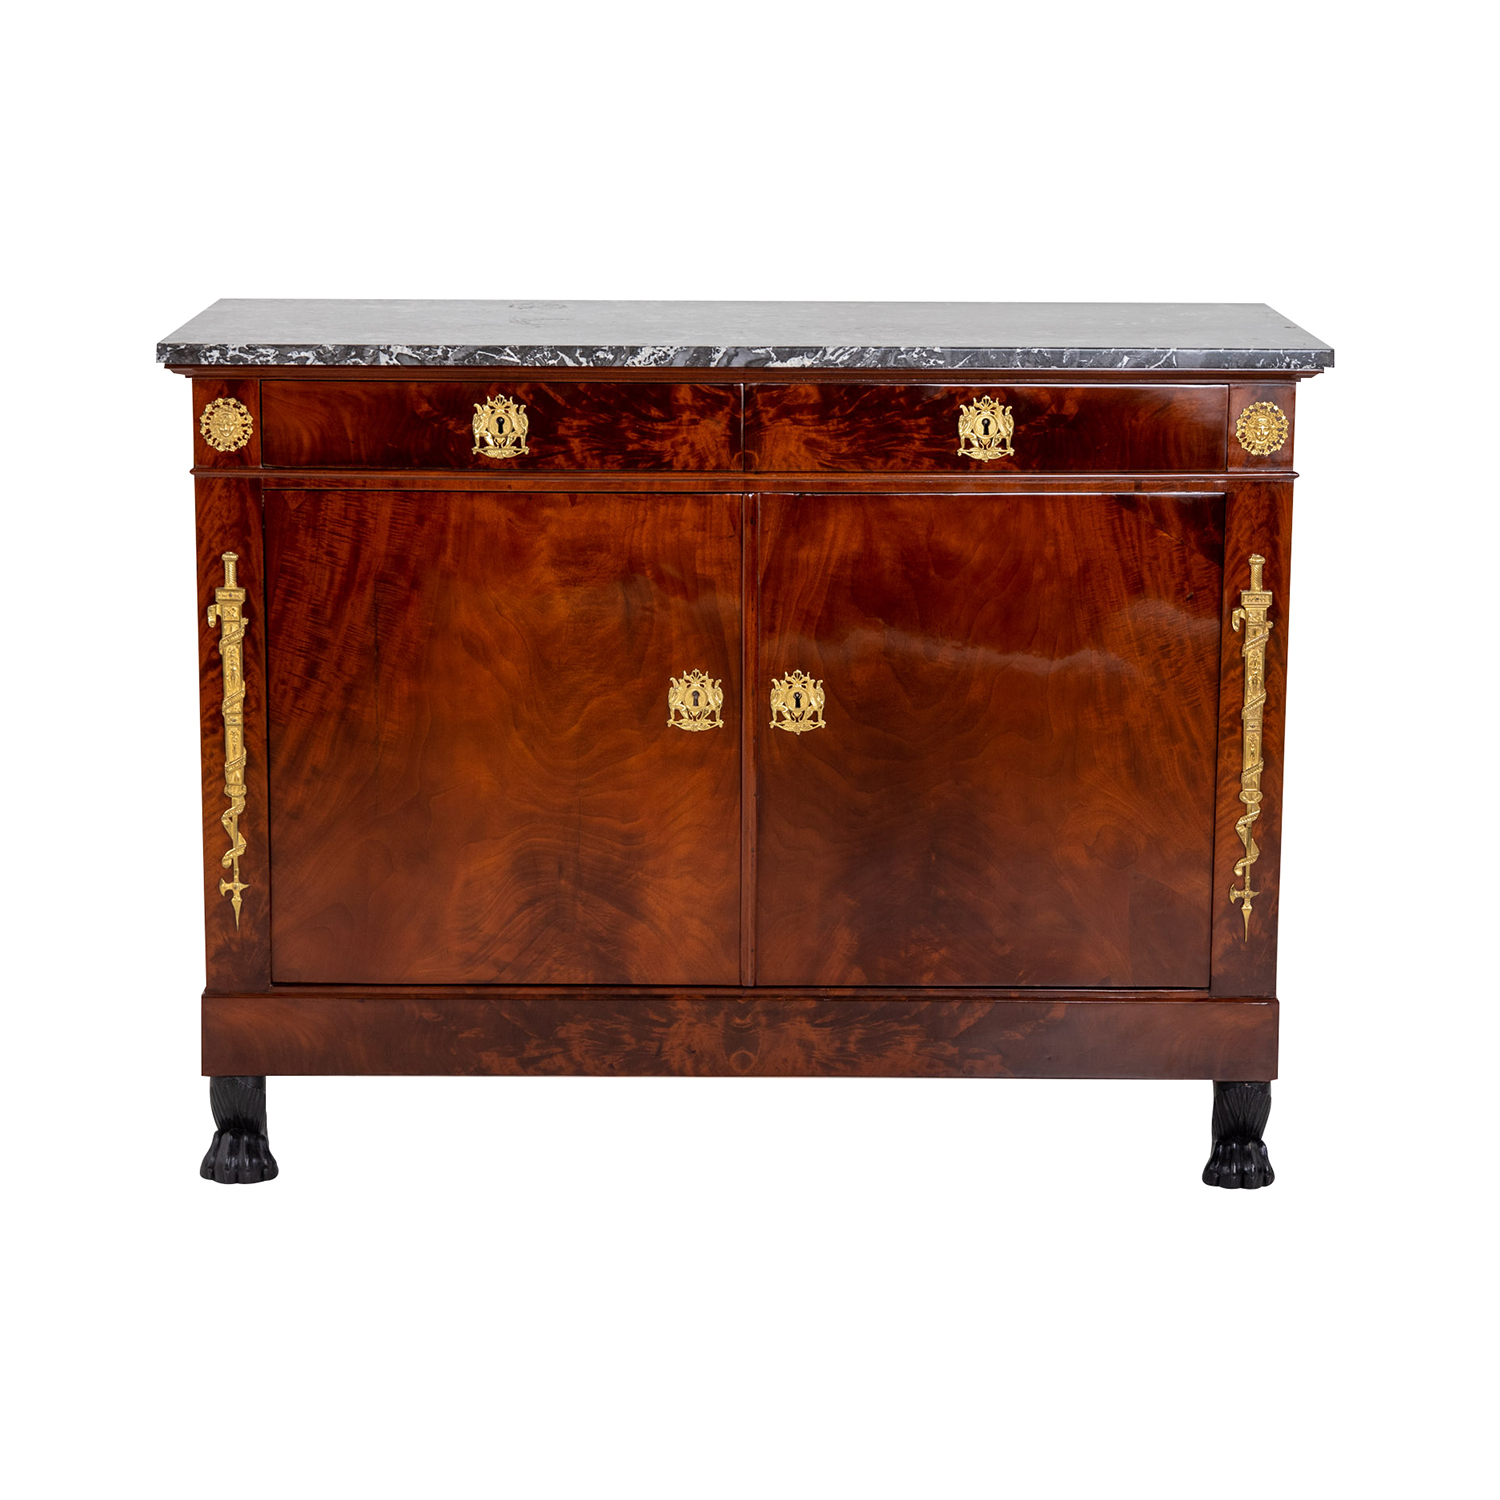 19th Century French Empire Antique Mahogany, Marble Chest of Drawers